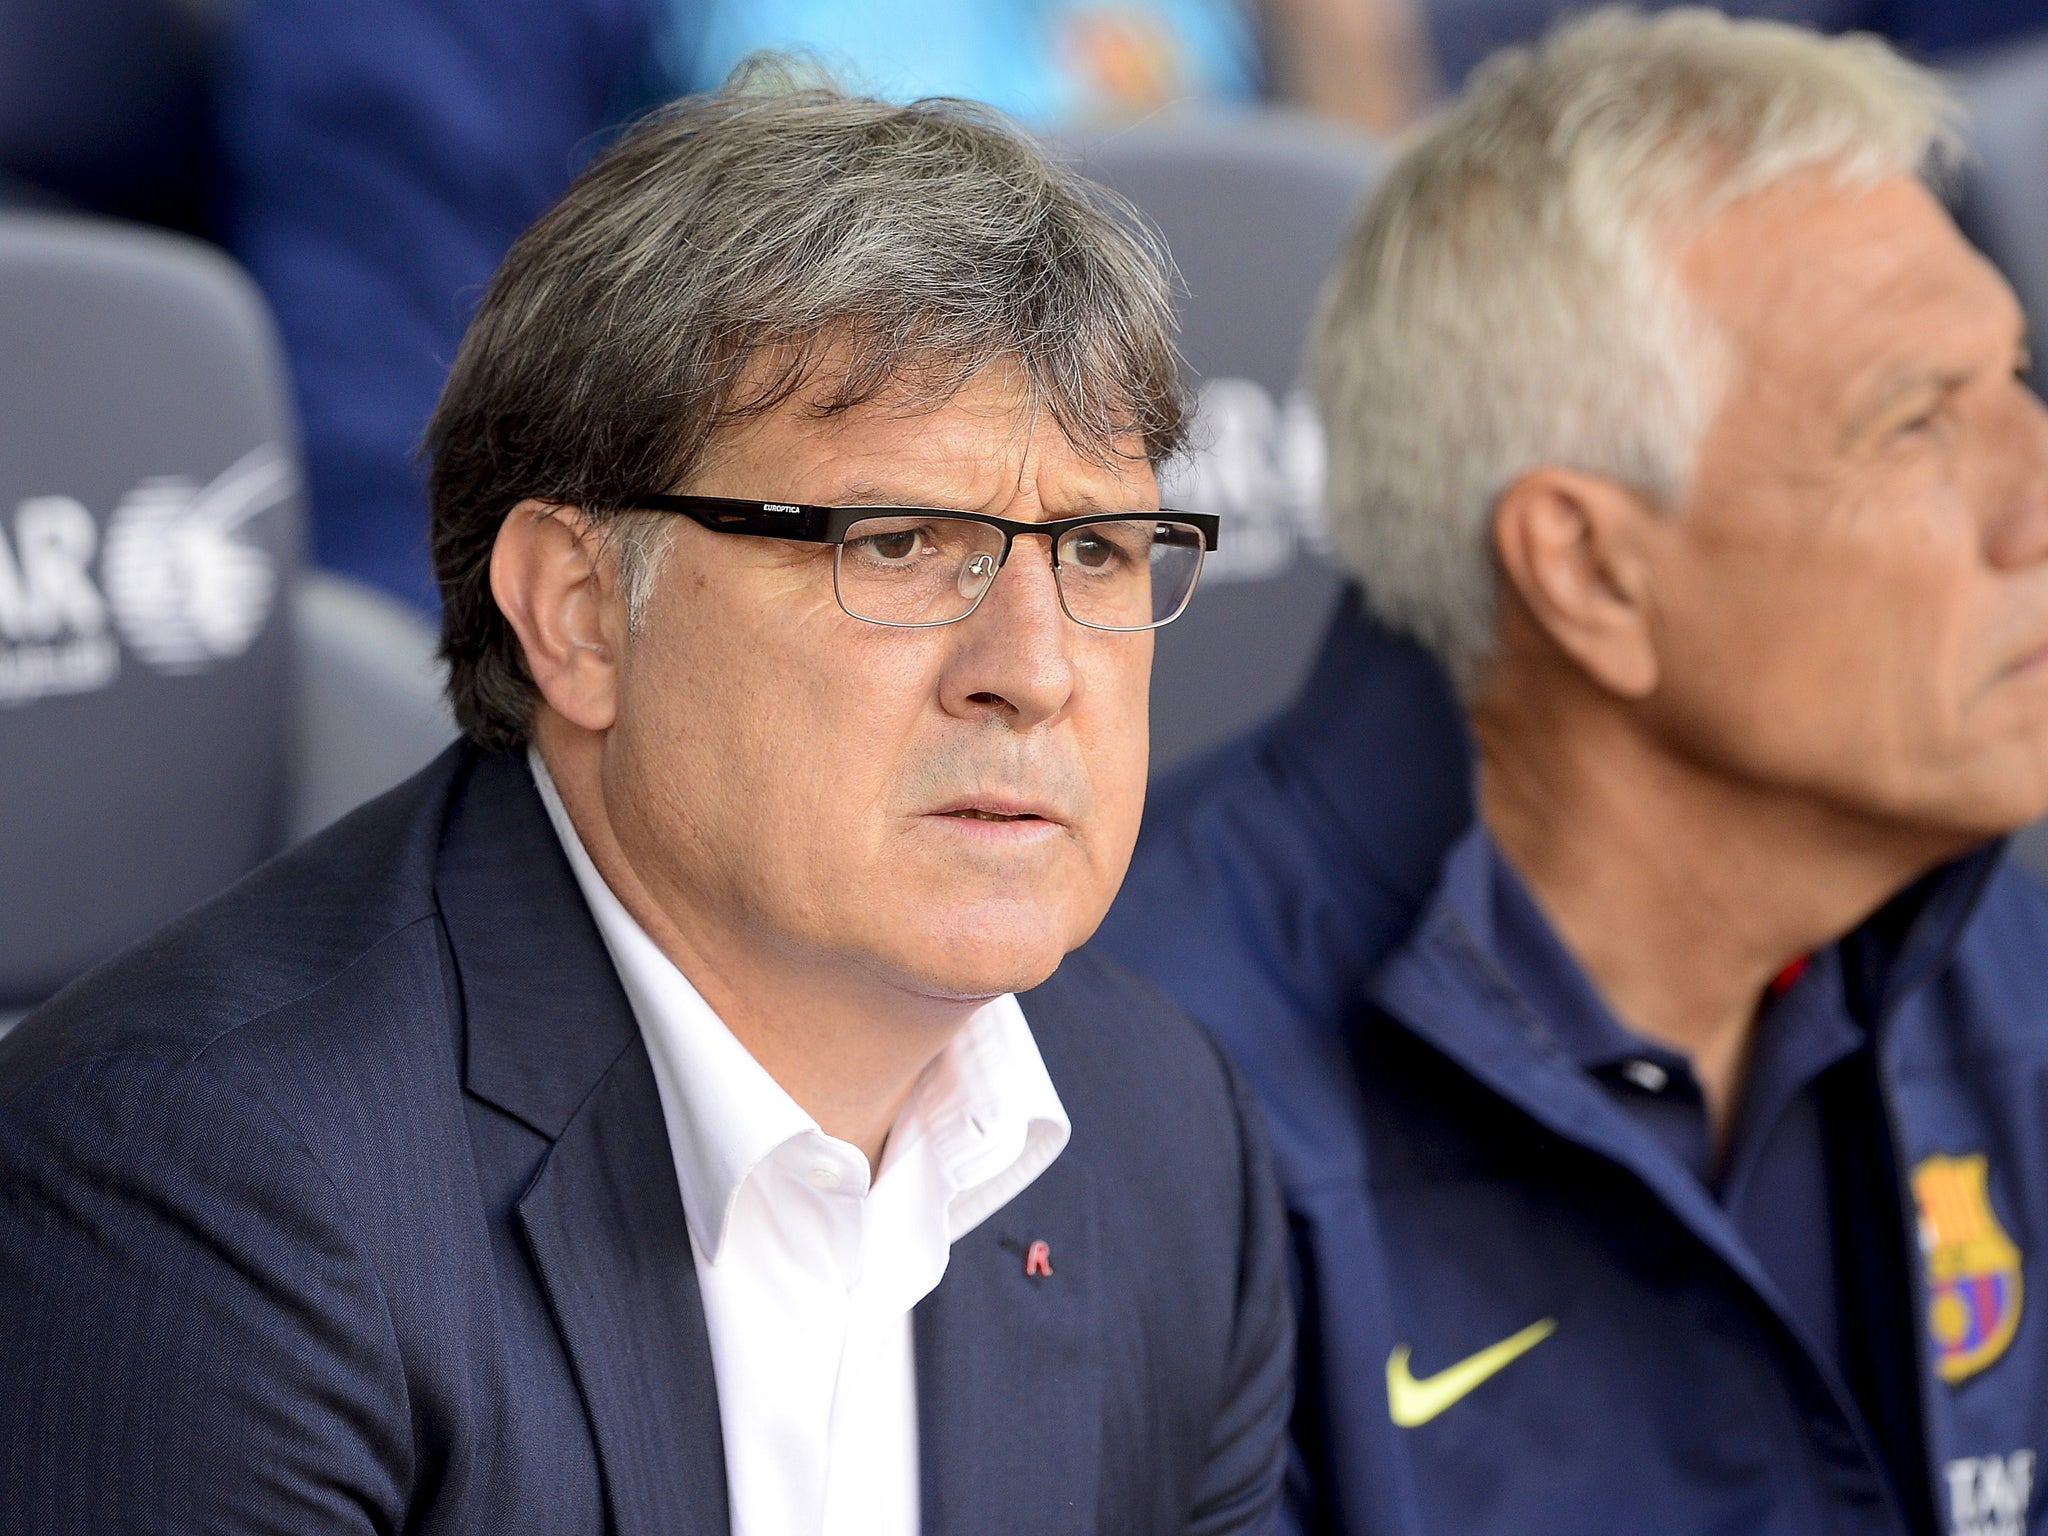 Former Barcelona coach Tata Martino is yet to extend his Atlanta contract